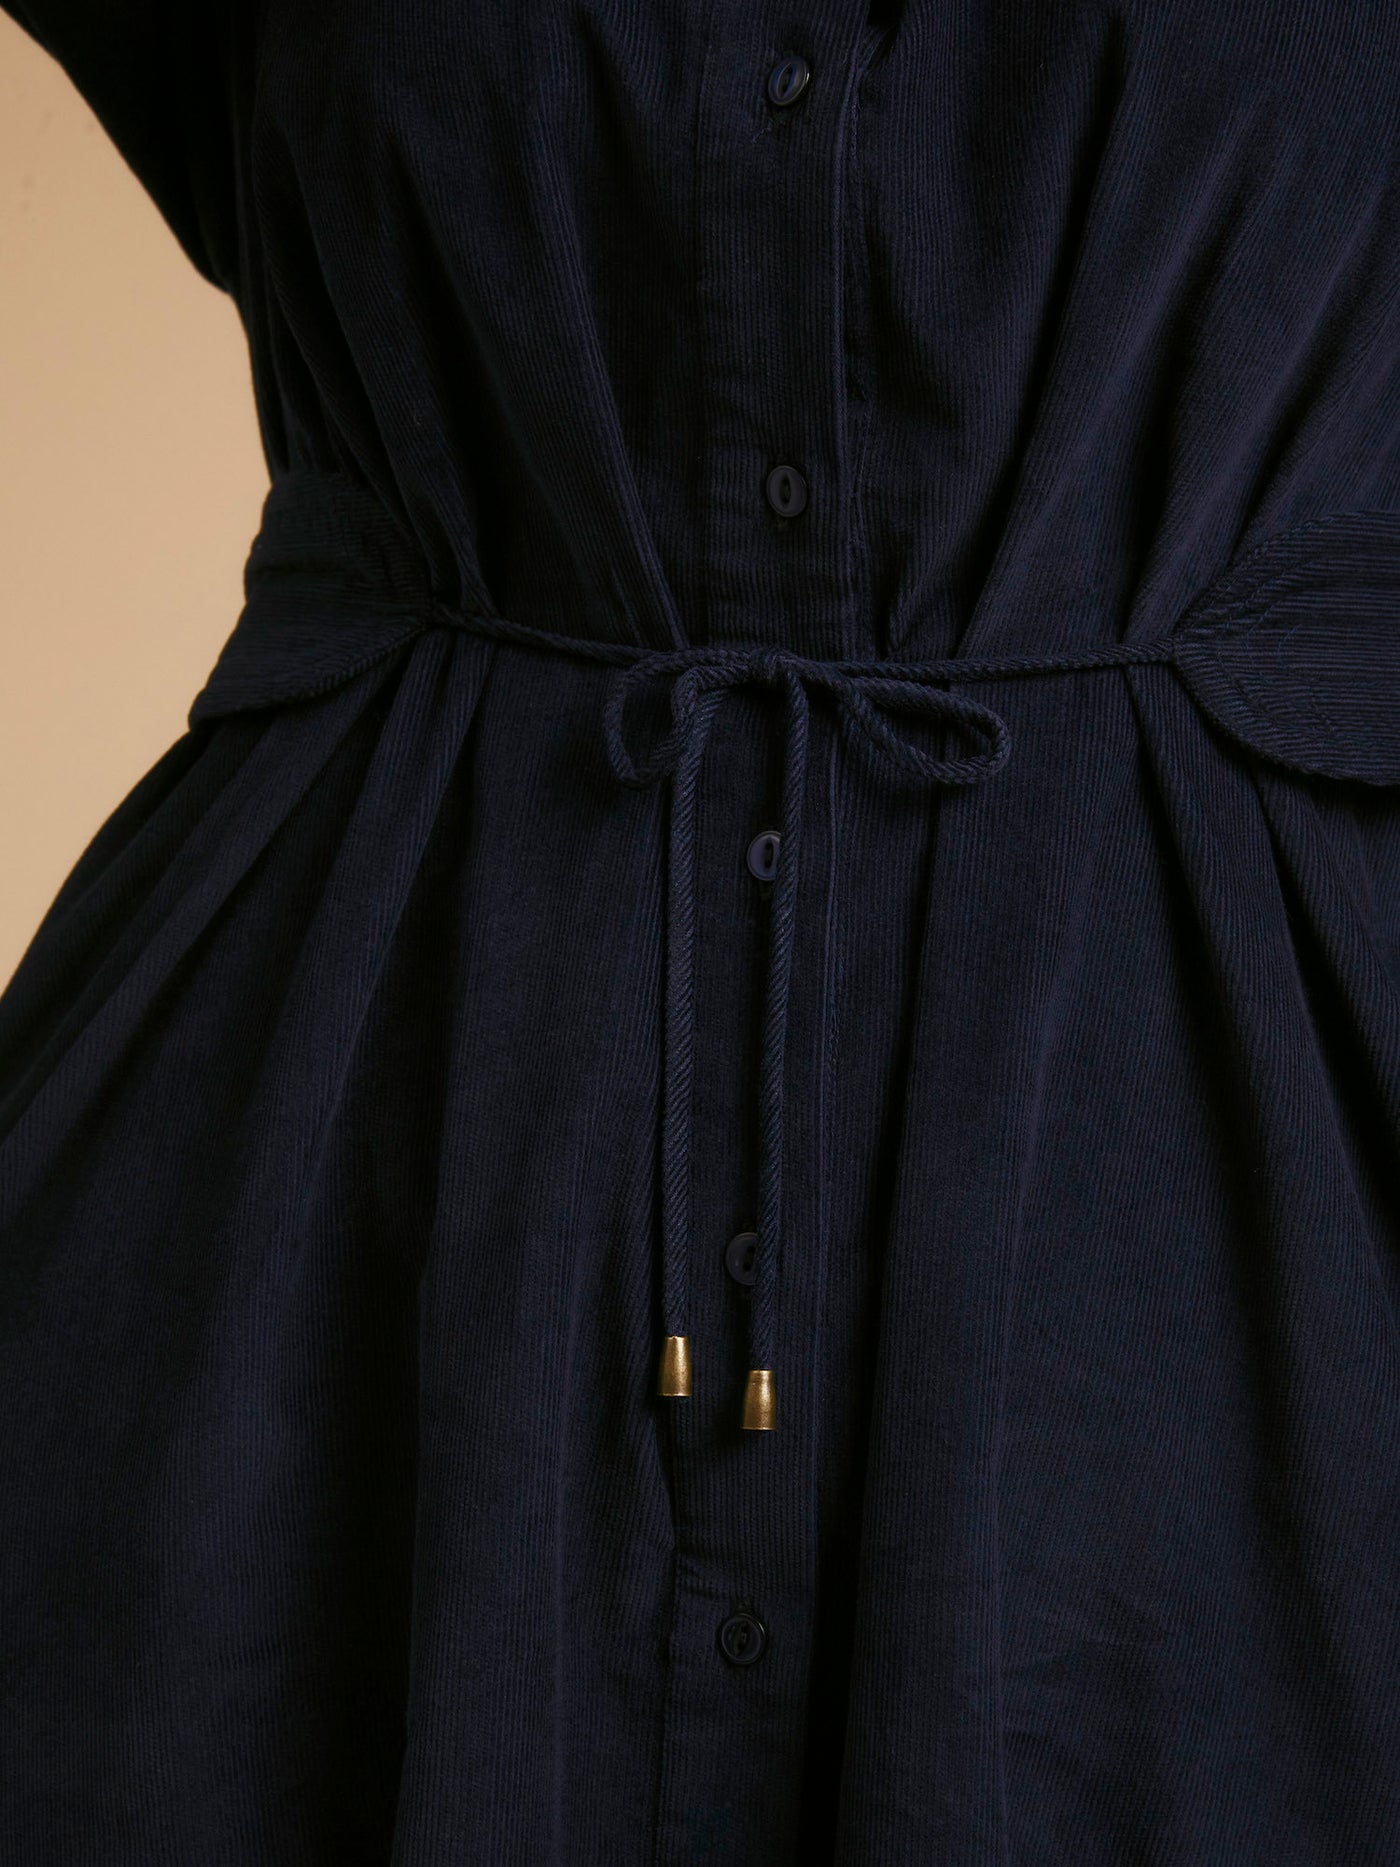 Xanthe dress Navy embroidered